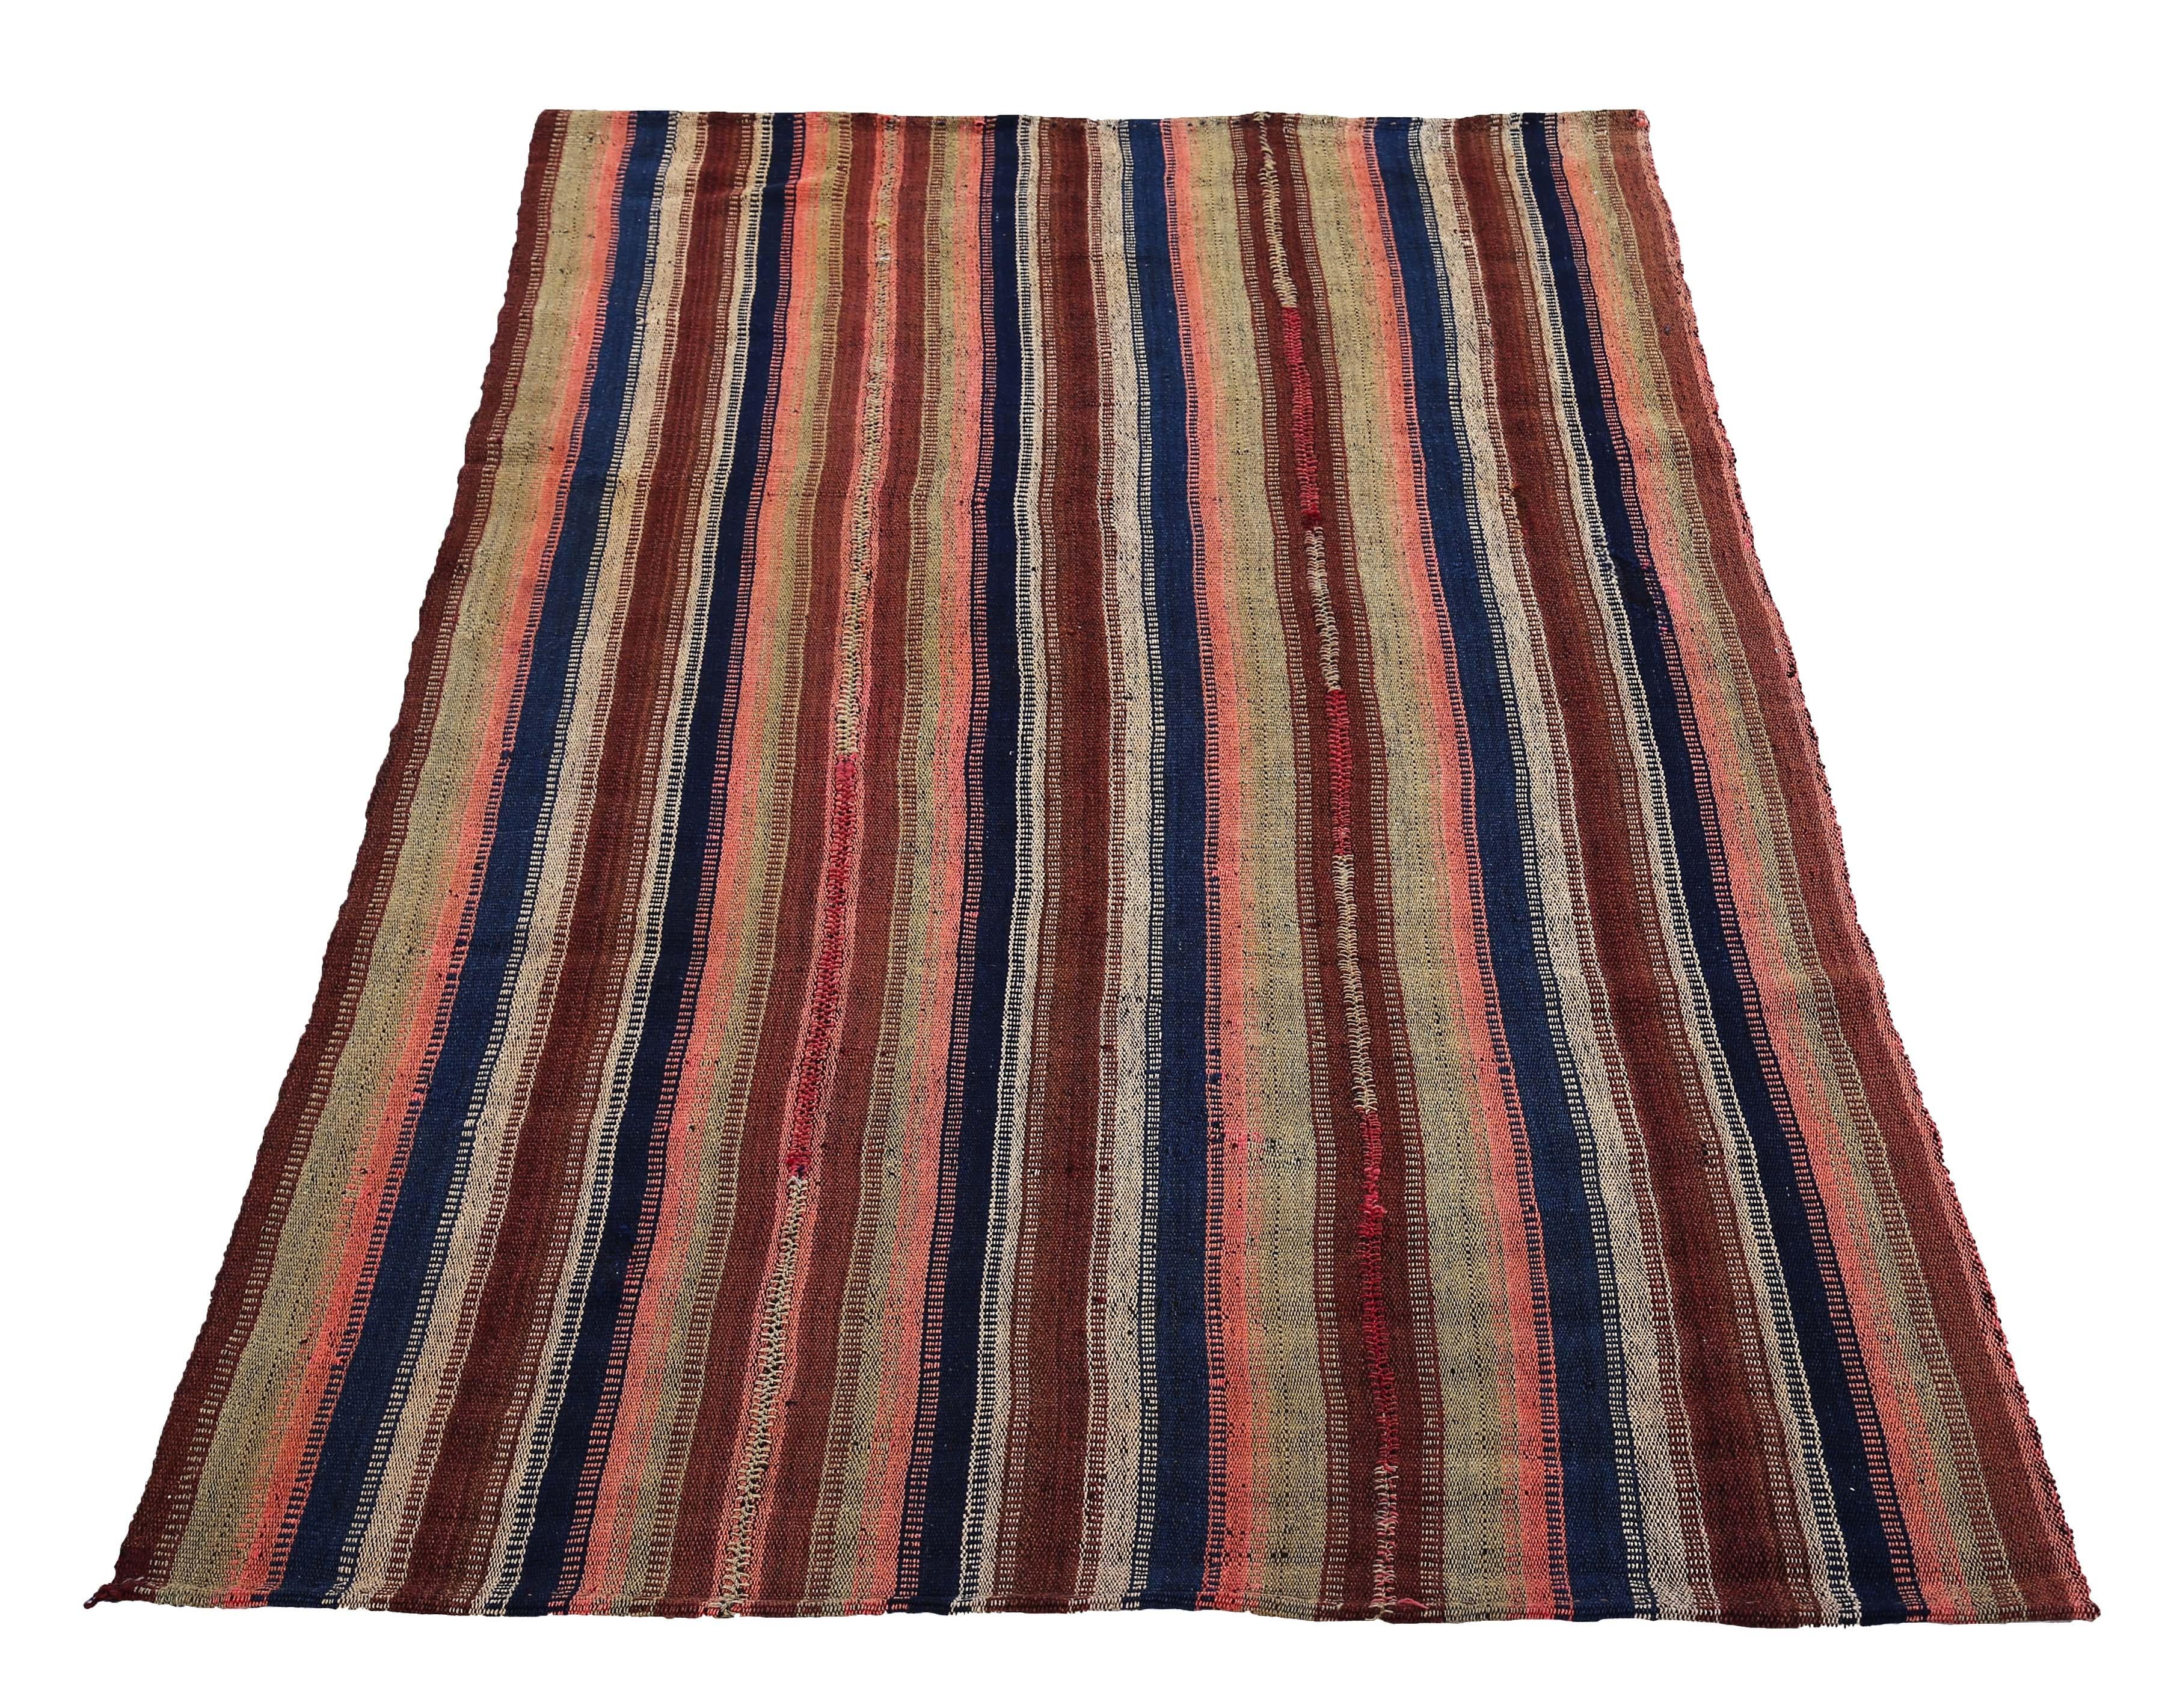 Turkish runner rug handwoven from the finest sheep’s wool and colored with all-natural vegetable dyes that are safe for humans and pets. It’s a traditional Kilim flat-weave design featuring navy blue, brown and pink stripes on an ivory field. It’s a